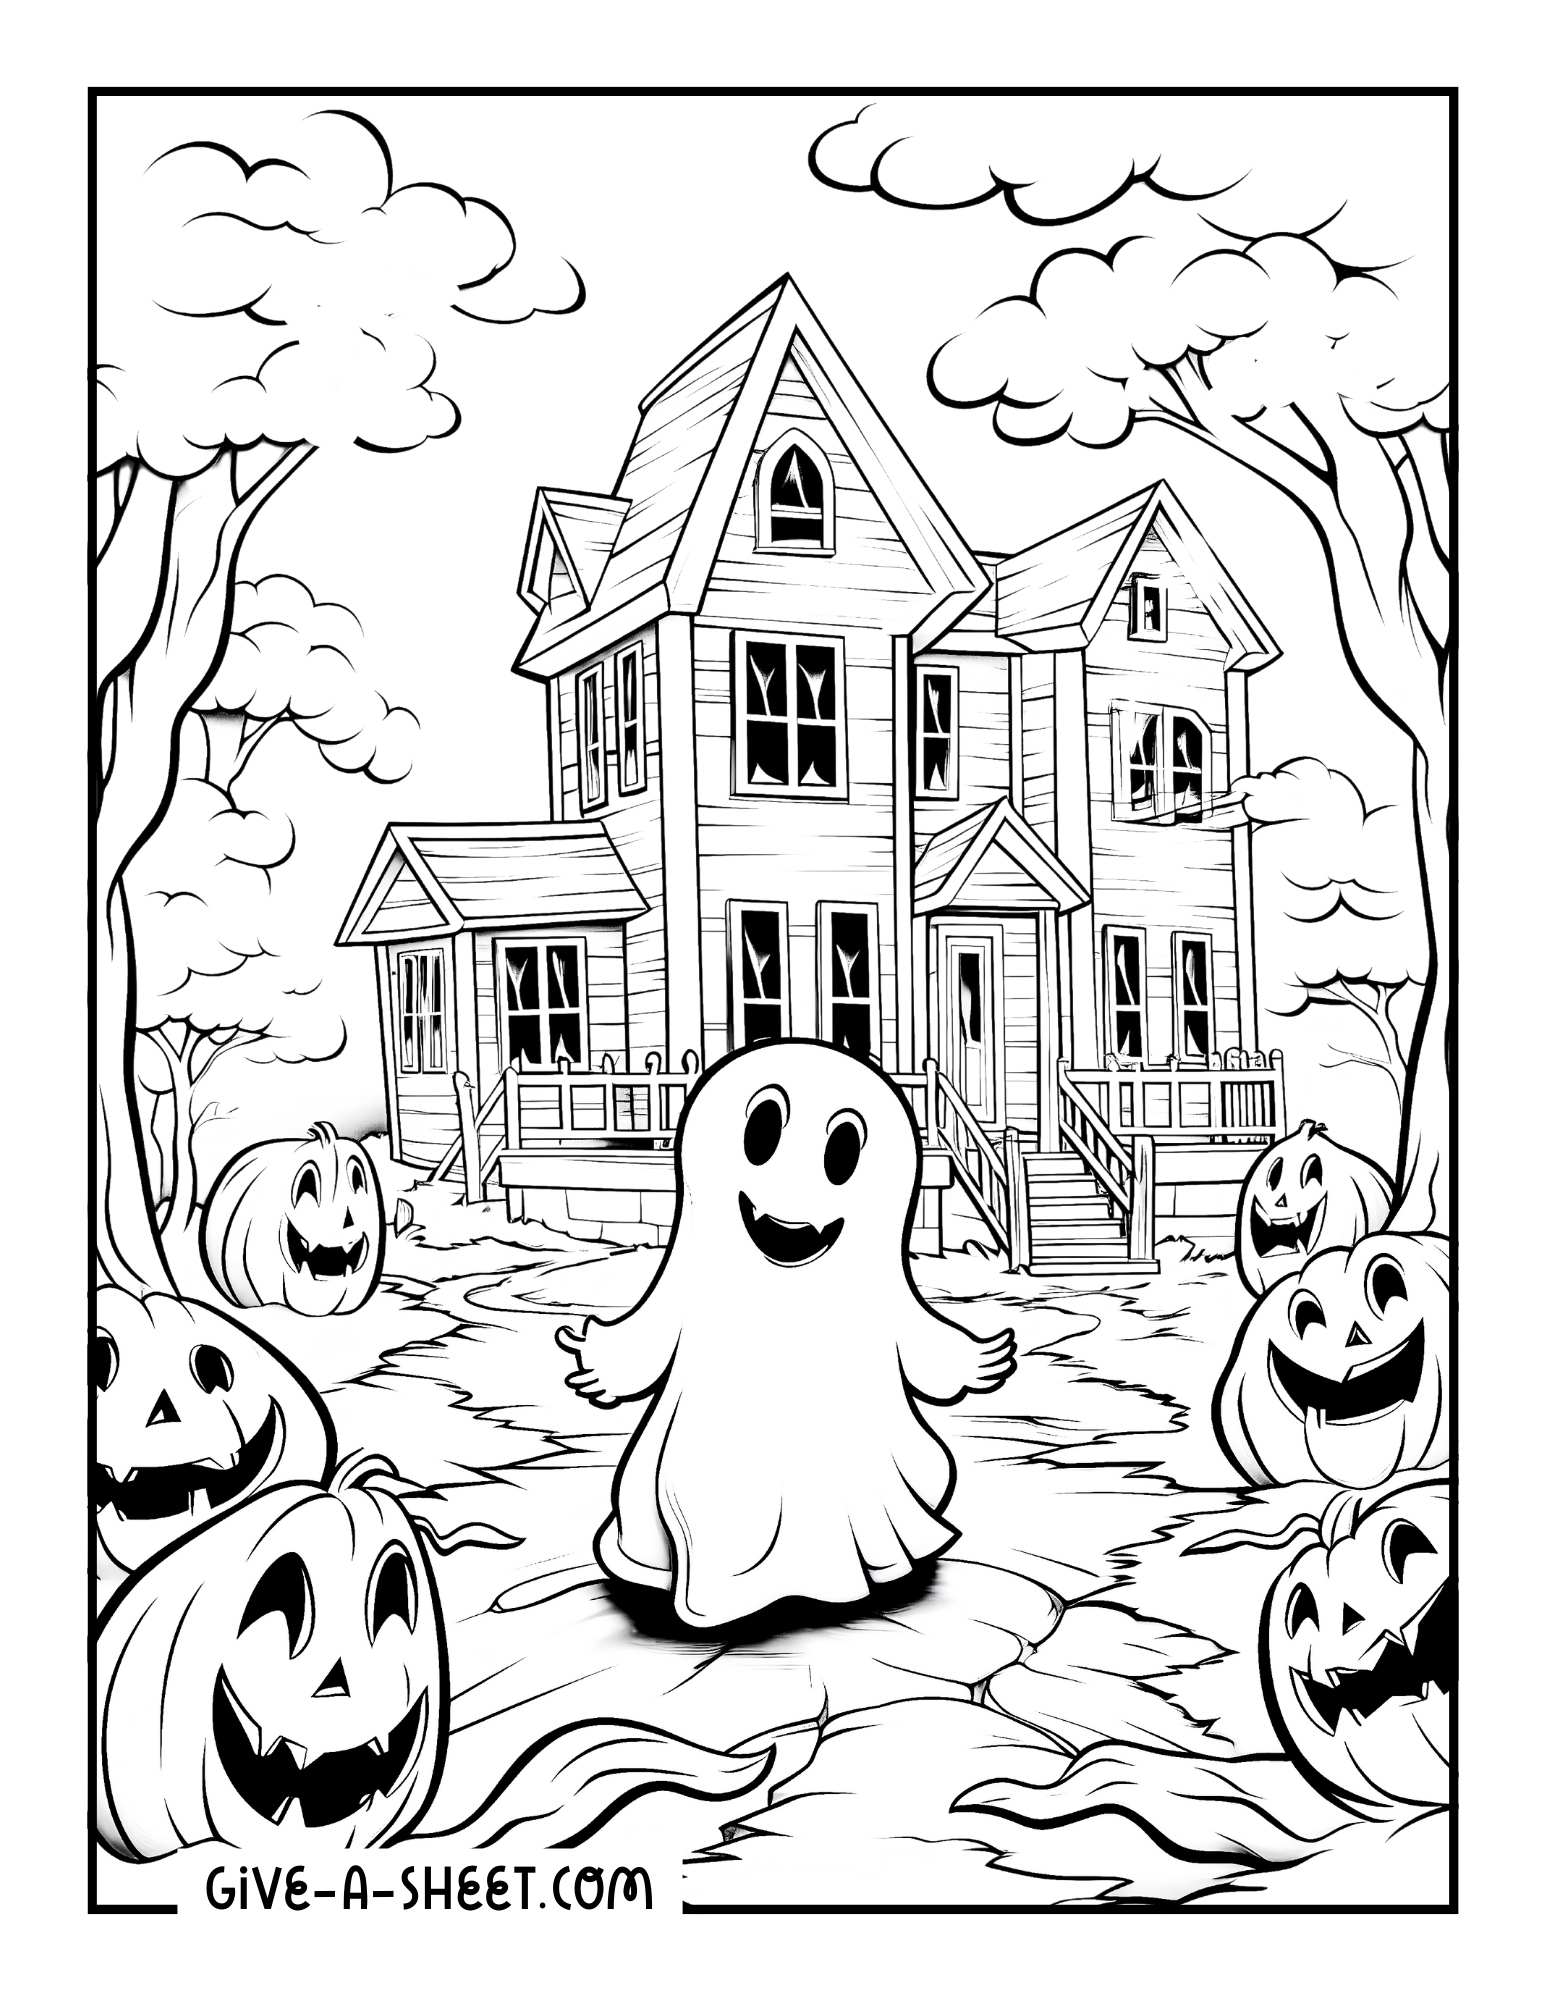 Cute ghosts on a haunted house coloring sheet.